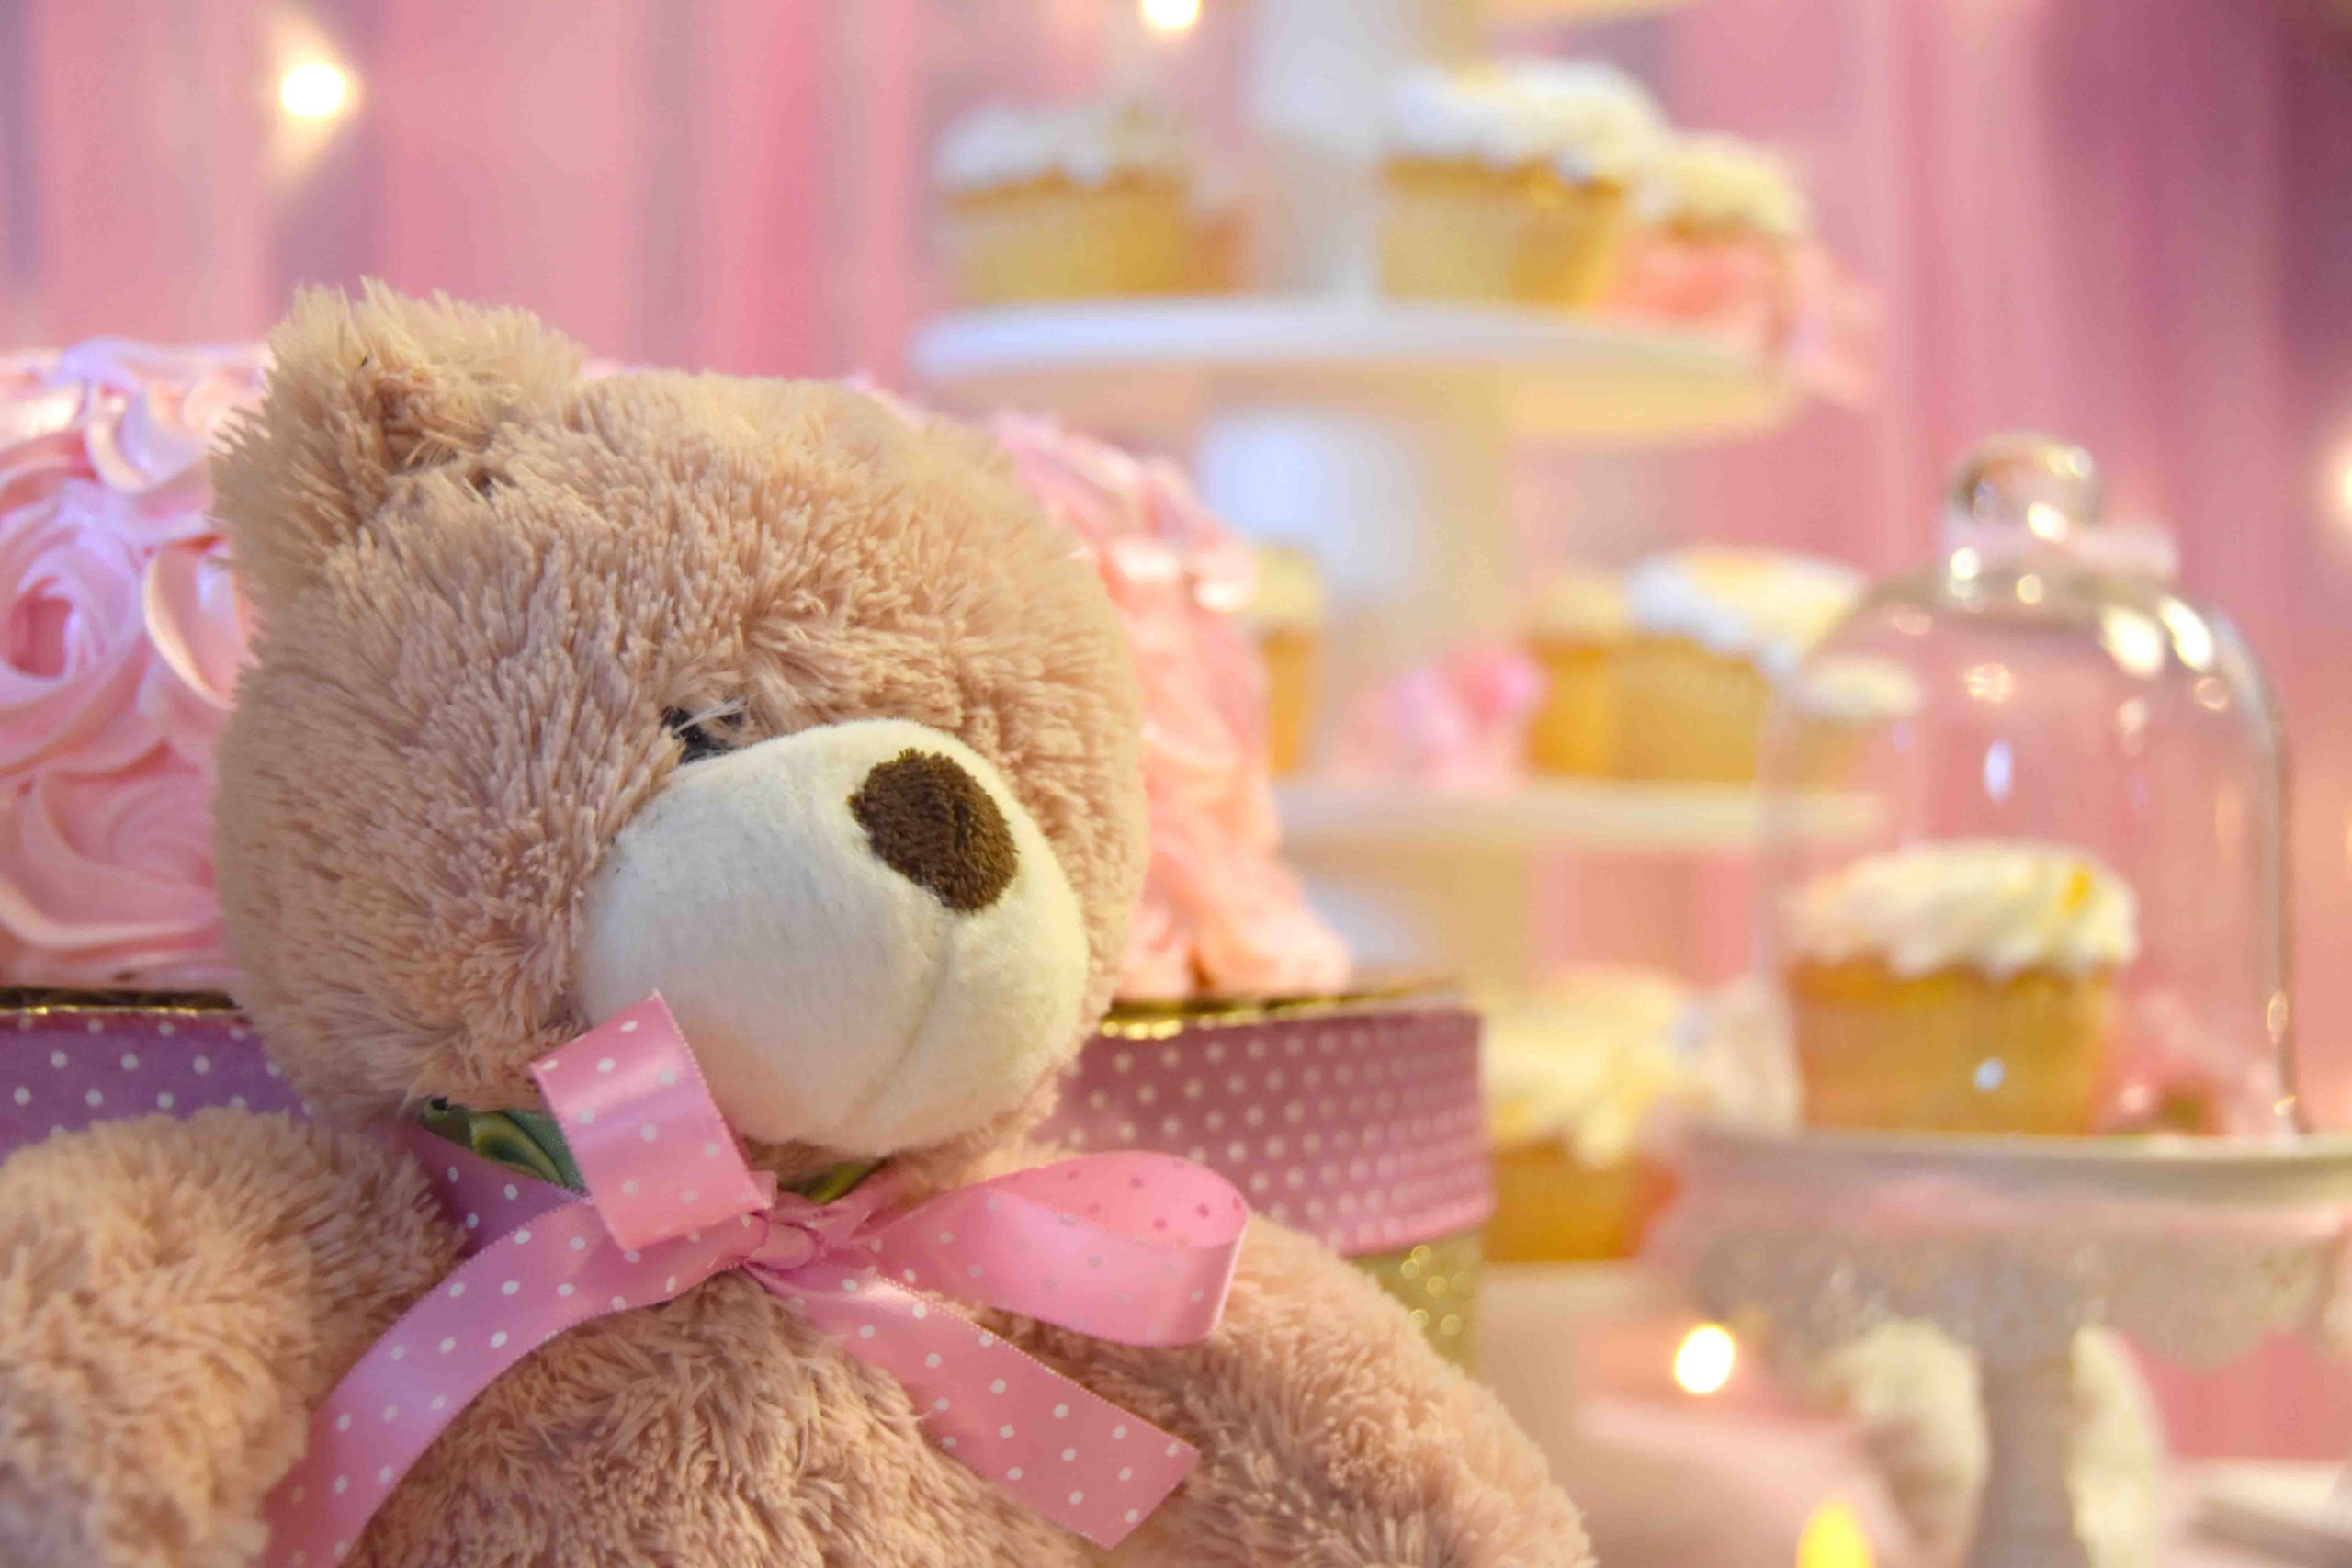 How to Avoid Common Mistakes in Planning Virtual Baby Shower